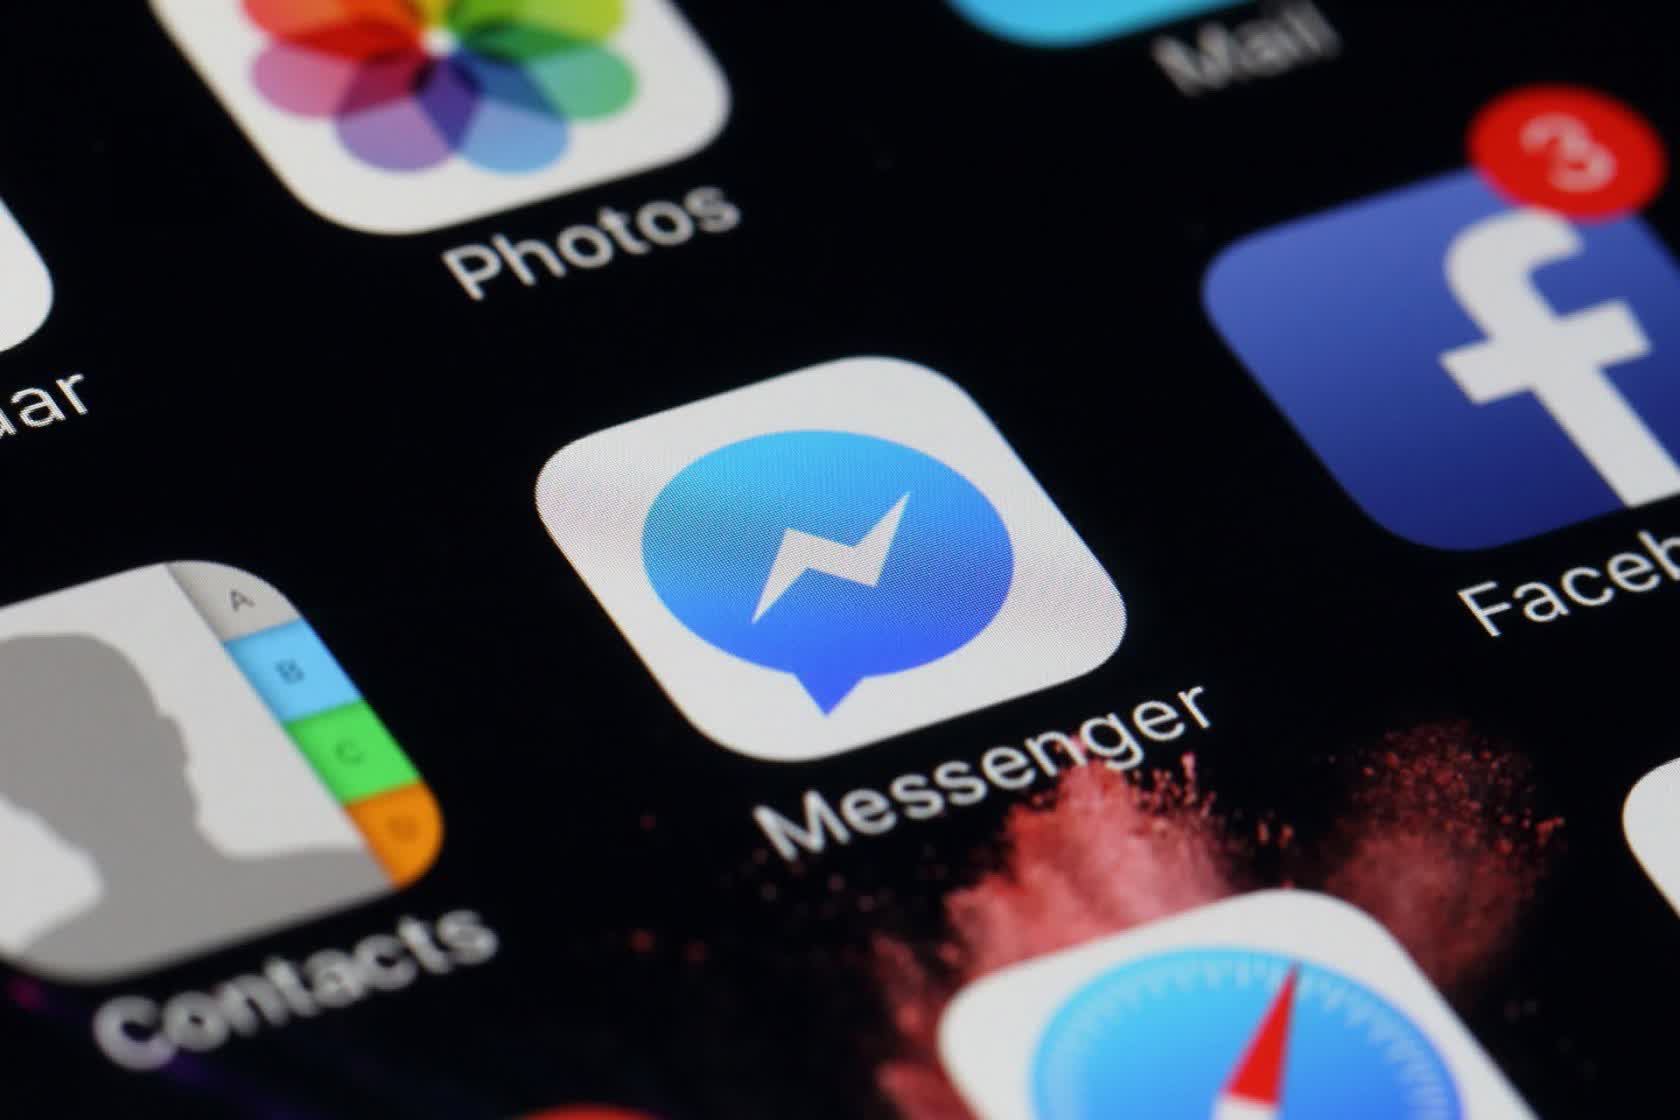 Facebook Messenger now boasts over 5 billion downloads, only the third non-Google app to pass the milestone